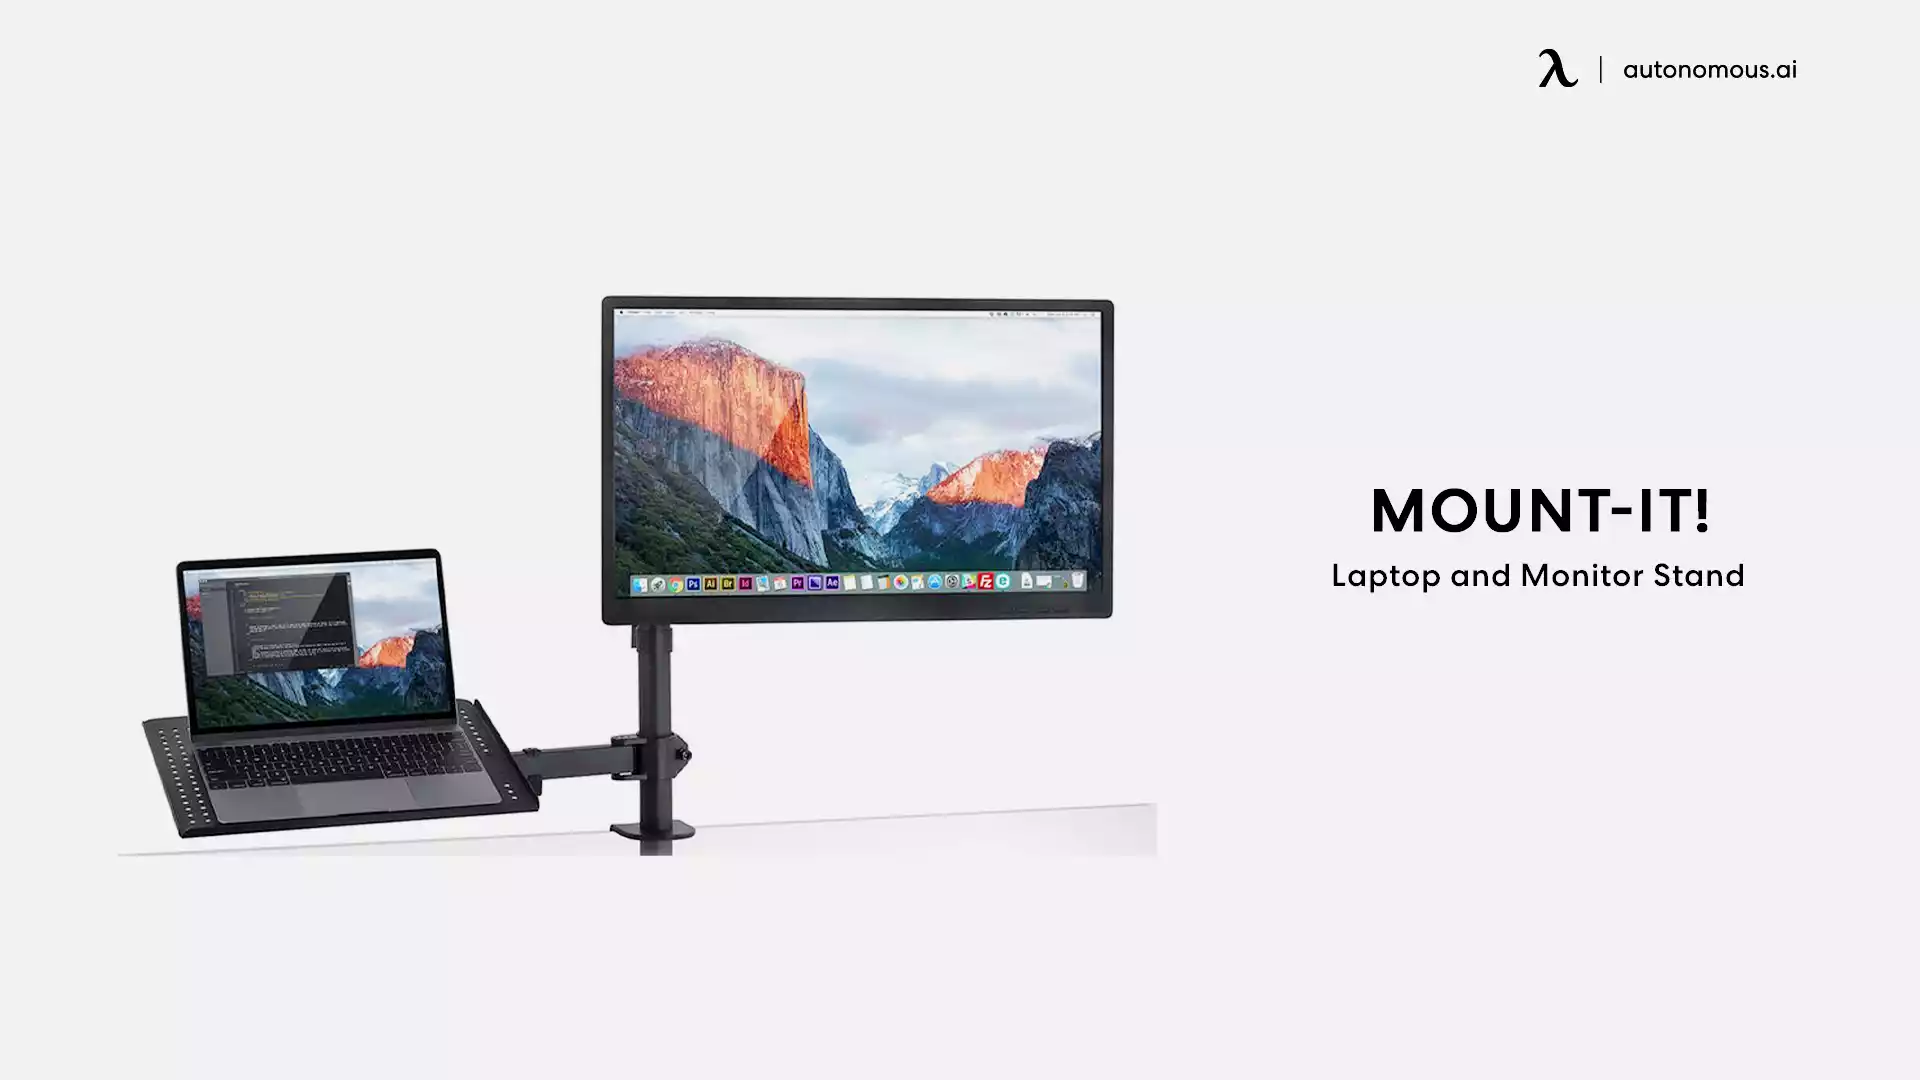 Mount-It! Laptop Desk Stand and keyboard pullout tray